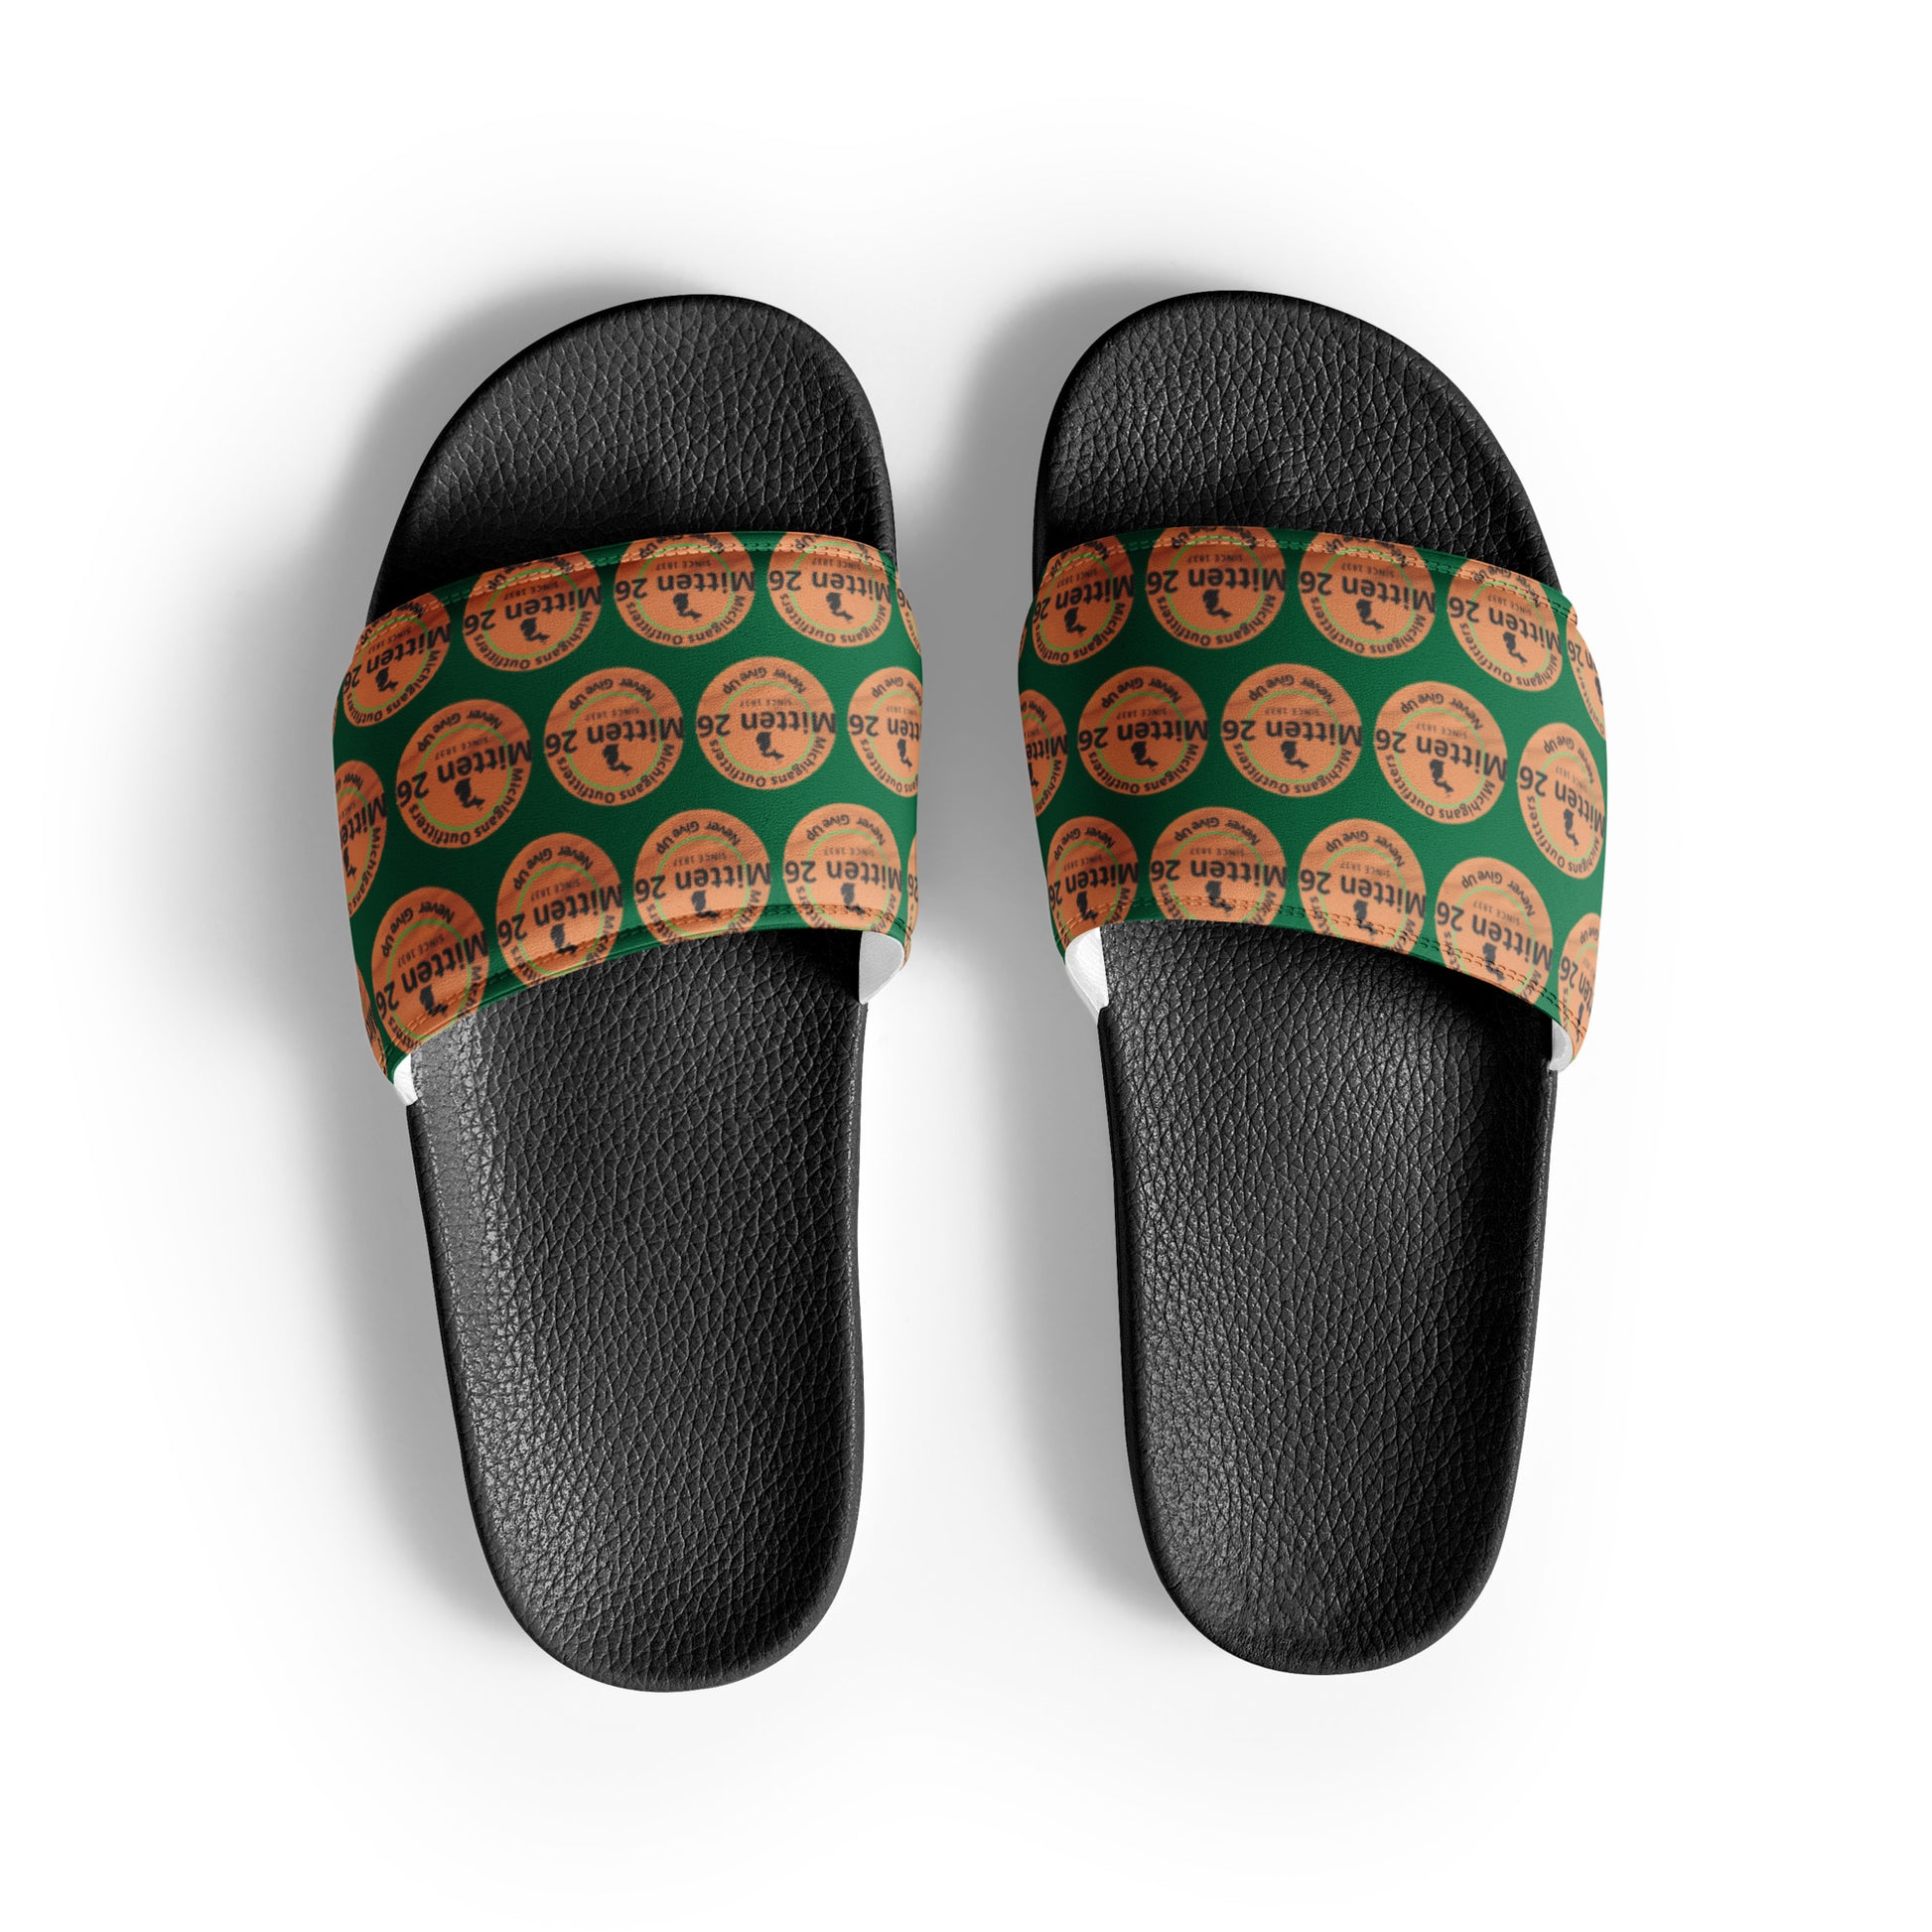 Men's slides – Mitten 26 Outfitters